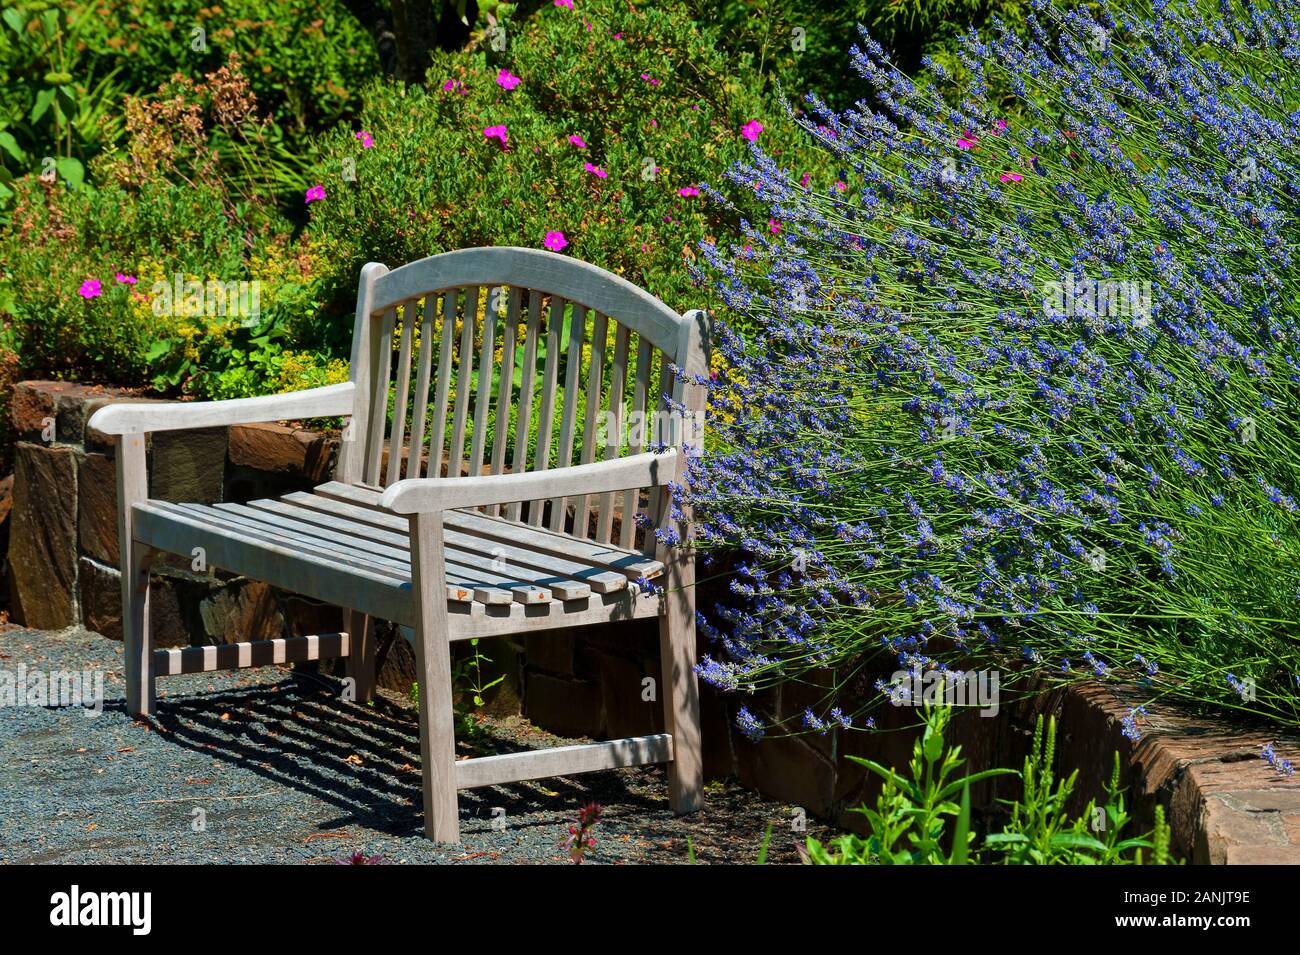 An inviting wooden bench sits in a sunny garden setting. Stock Photo